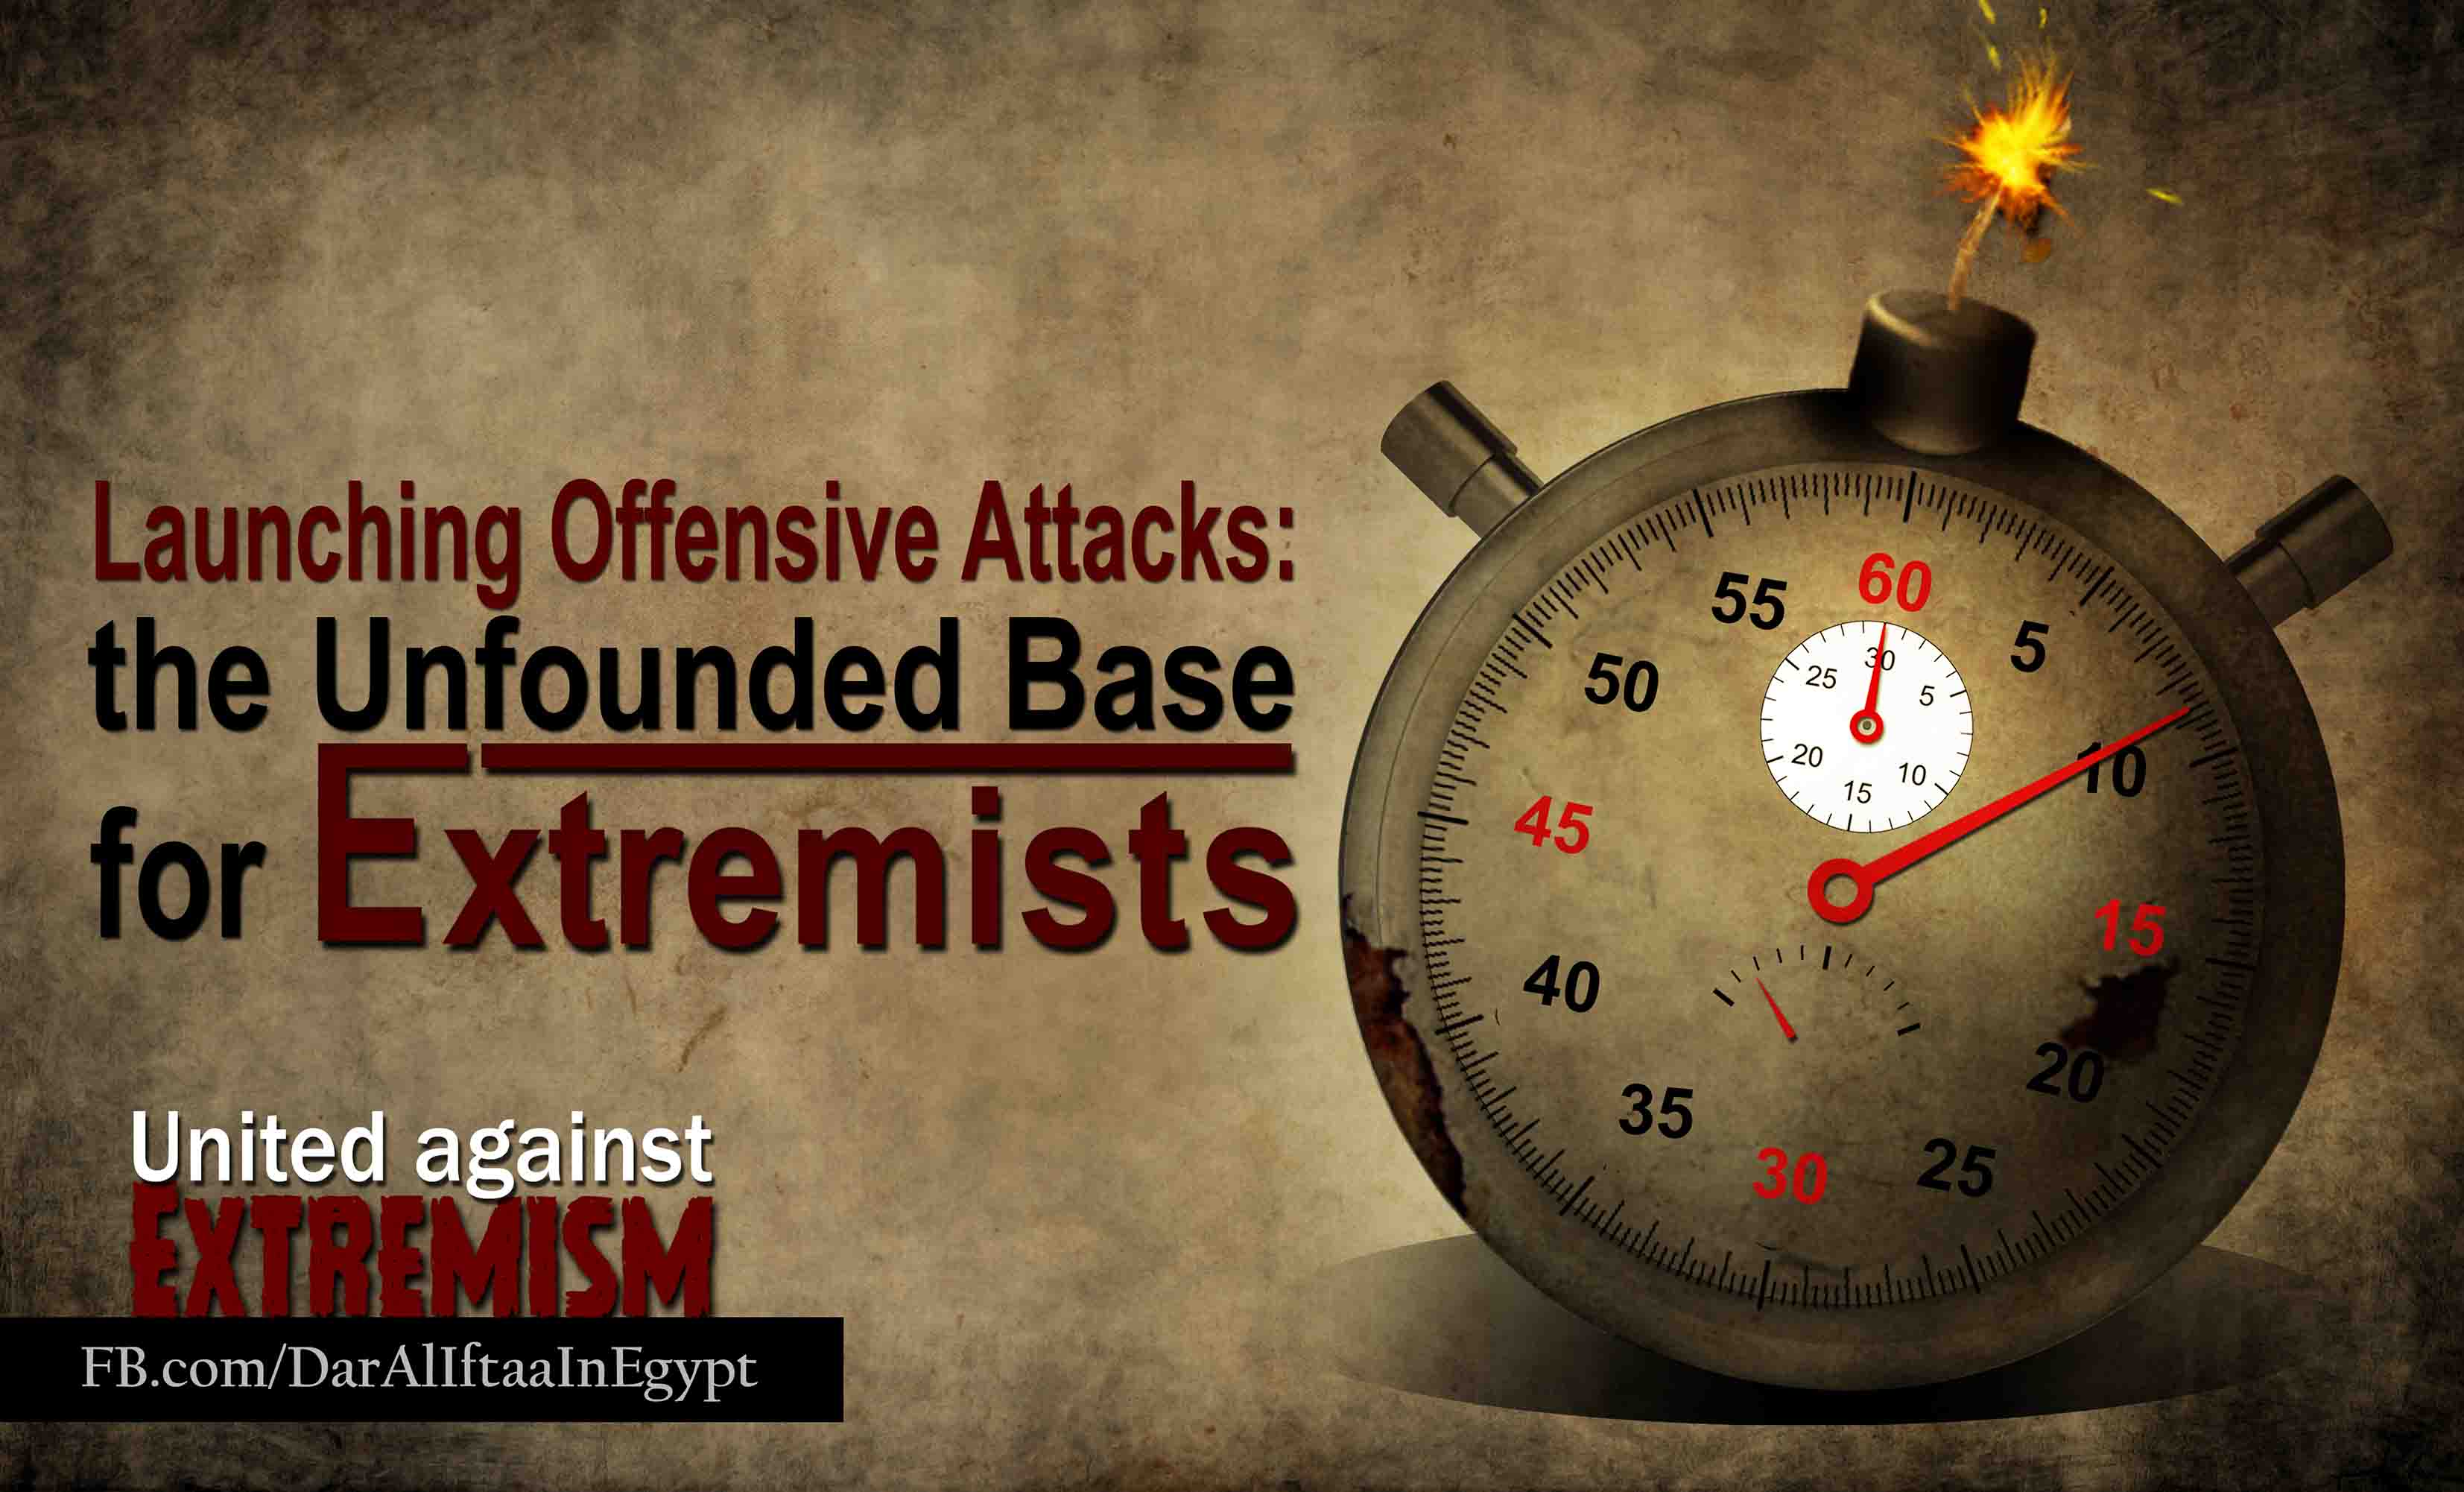 Launching Offensive Attacks: the Unfounded Base for Extremists